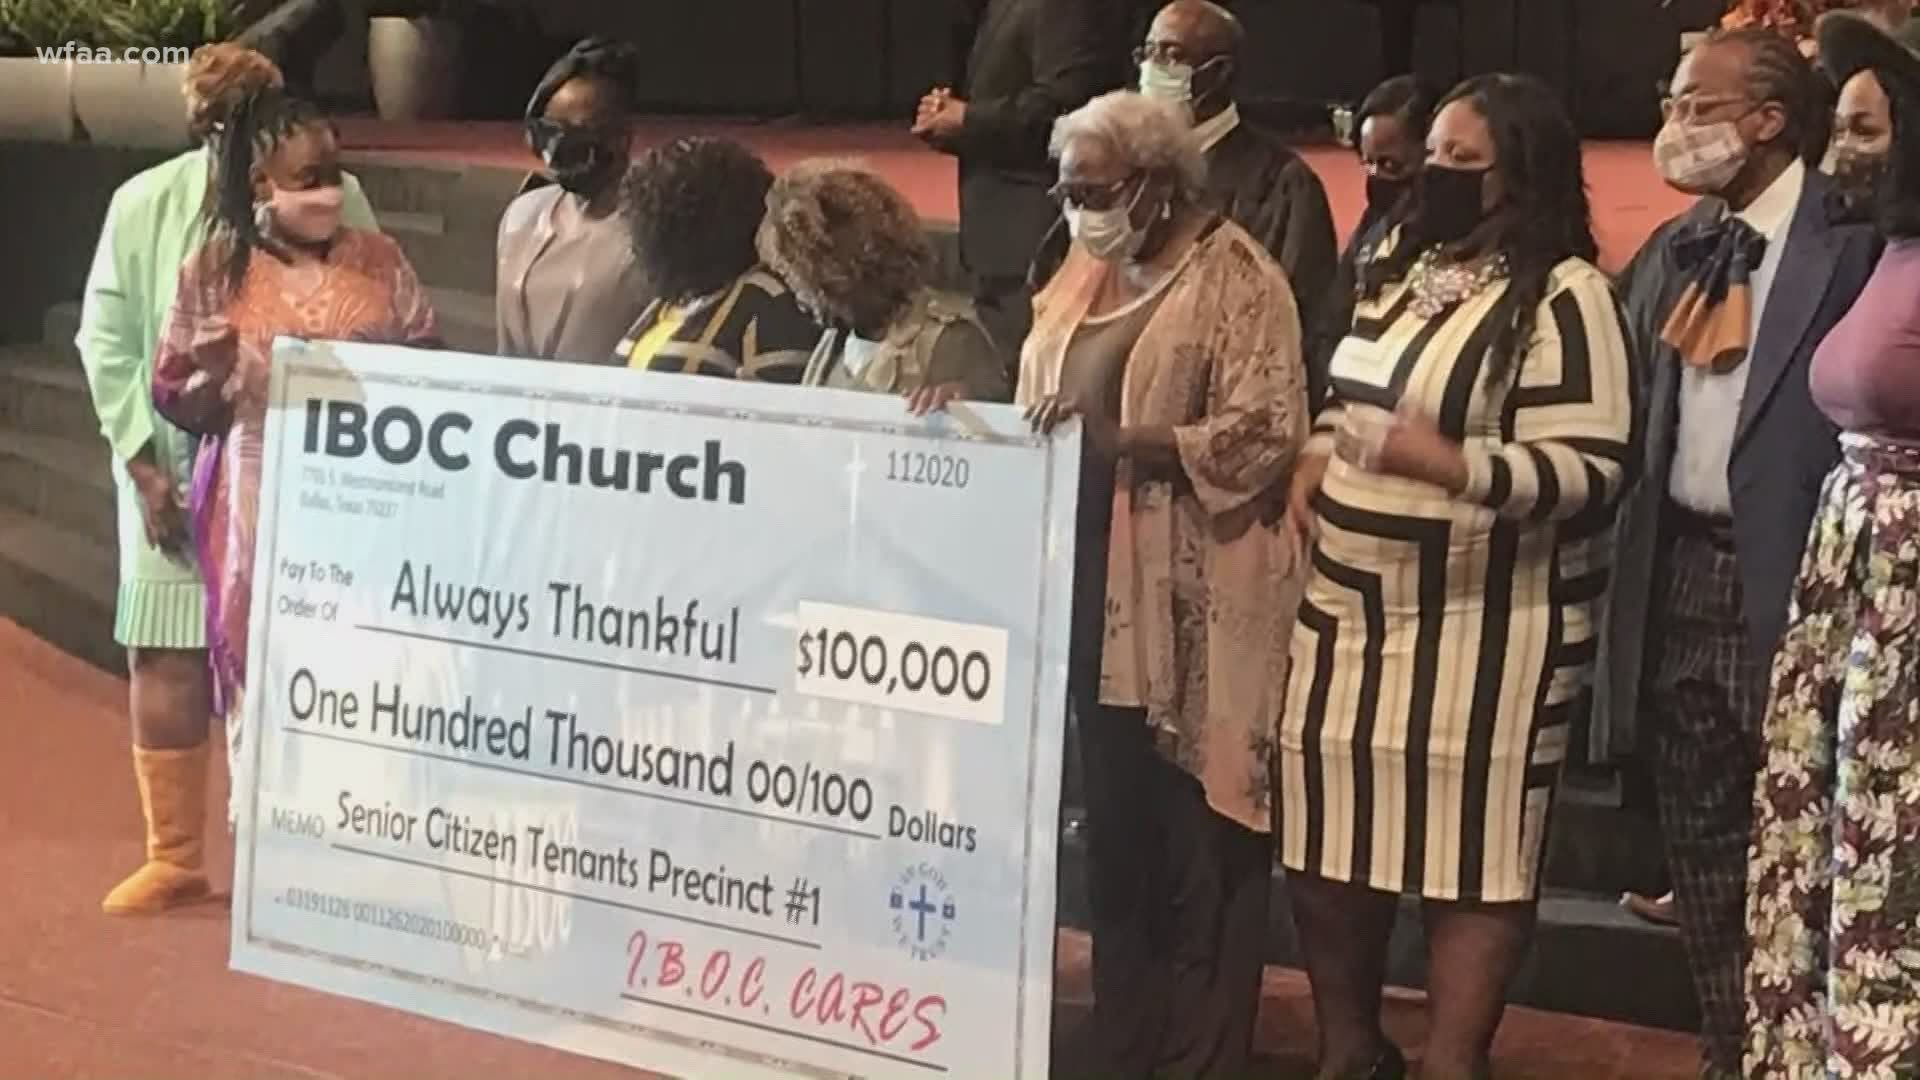 IBOC Church announced its committing $100,000 to rental assistance program that will help some seniors in southern Dallas avoid eviction.